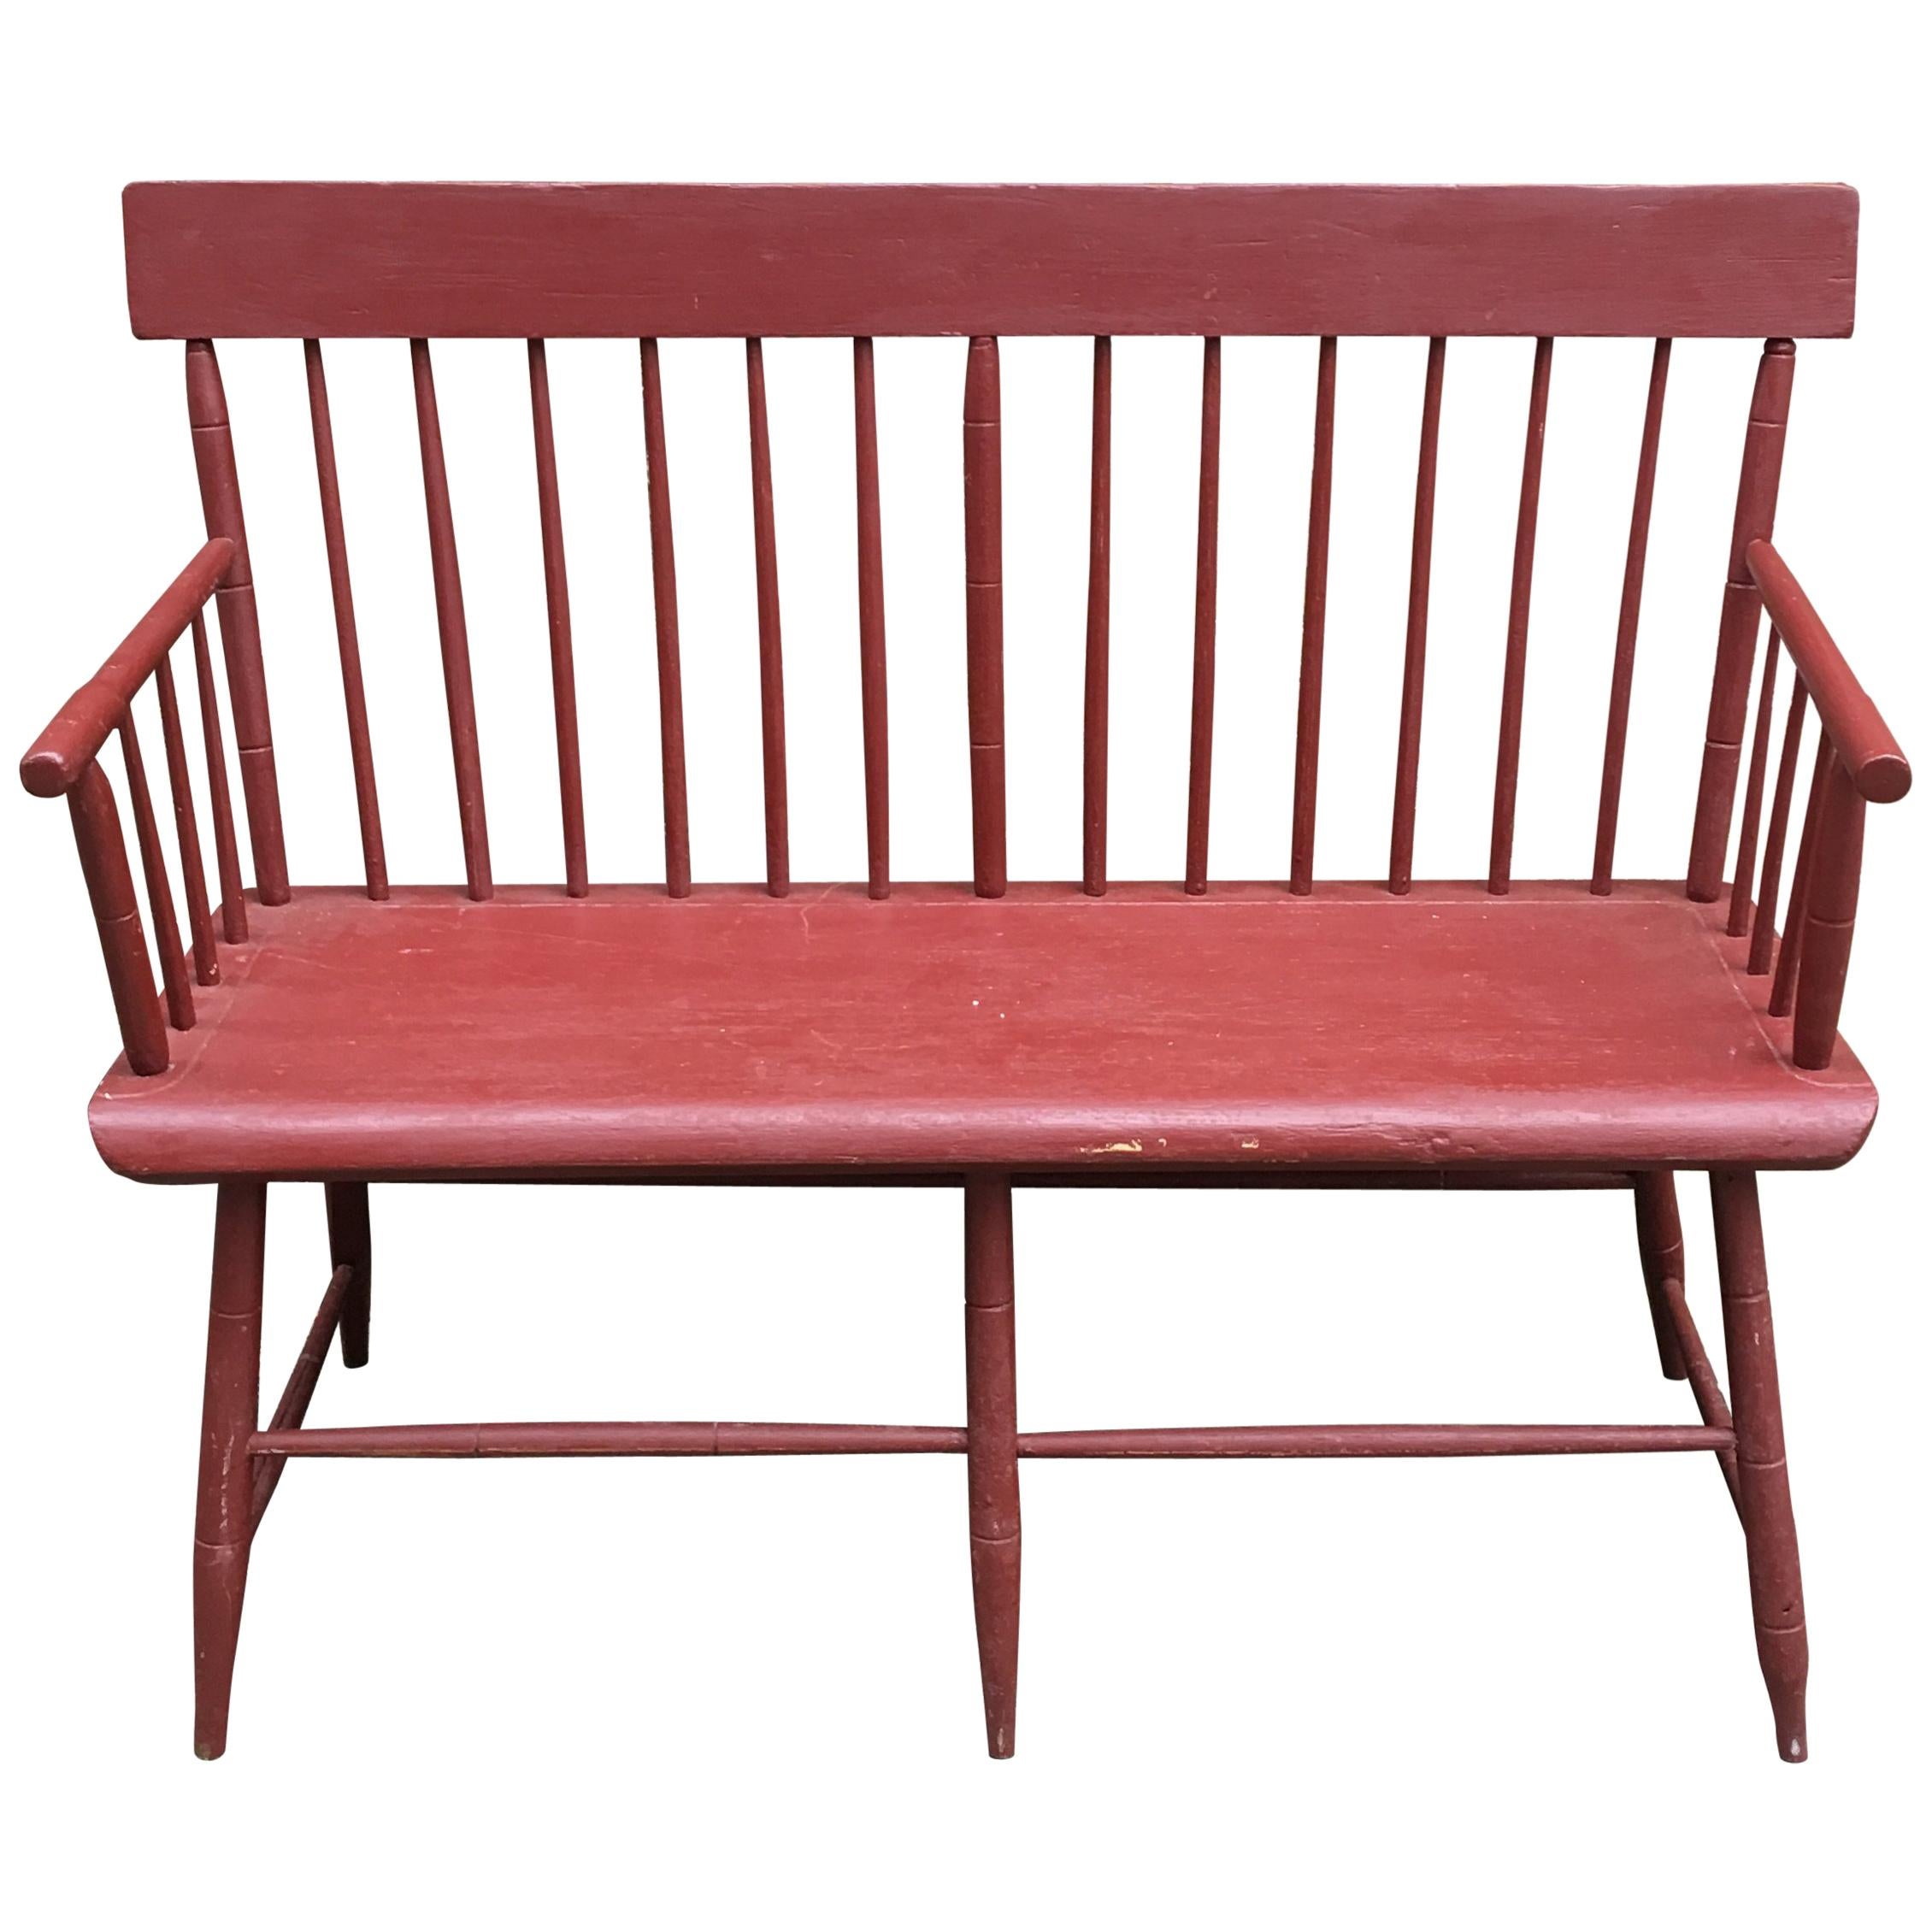 Small Painted Windsor Bench, circa 1830